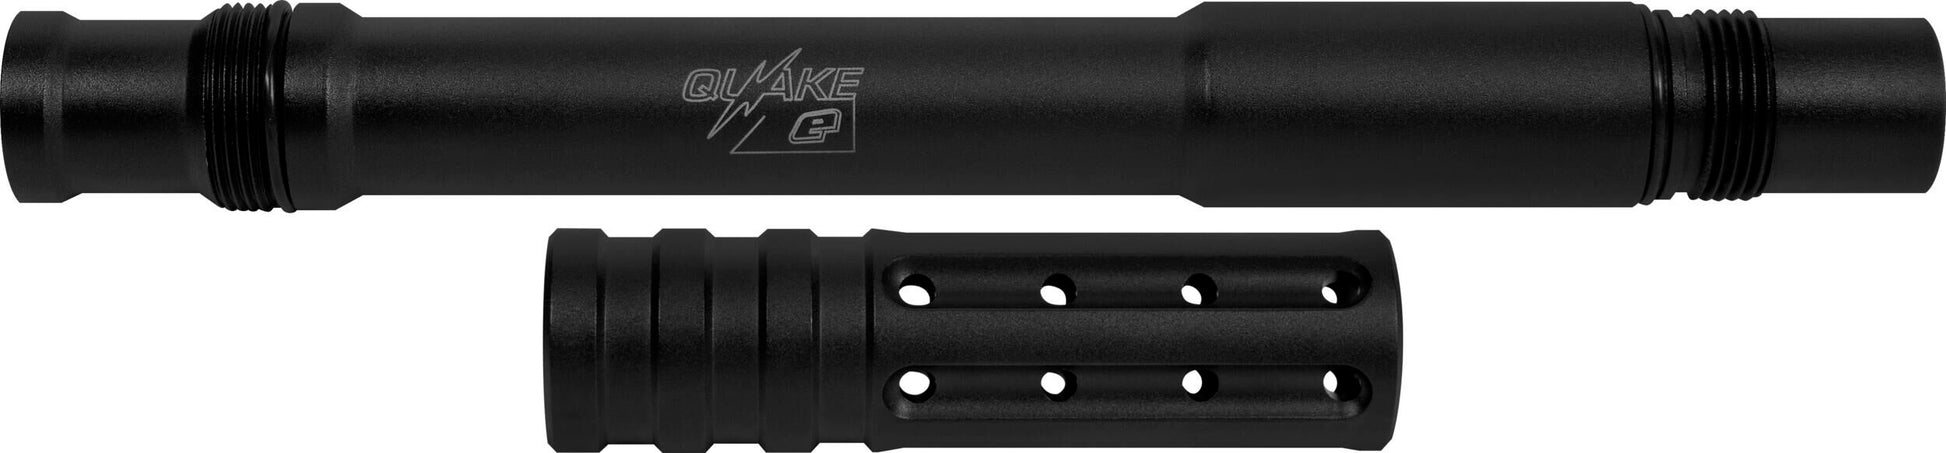 Planet Eclipse 11&quot; Quake FSR Rifled Barrel by Carmatech Engineering - Planet Eclipse